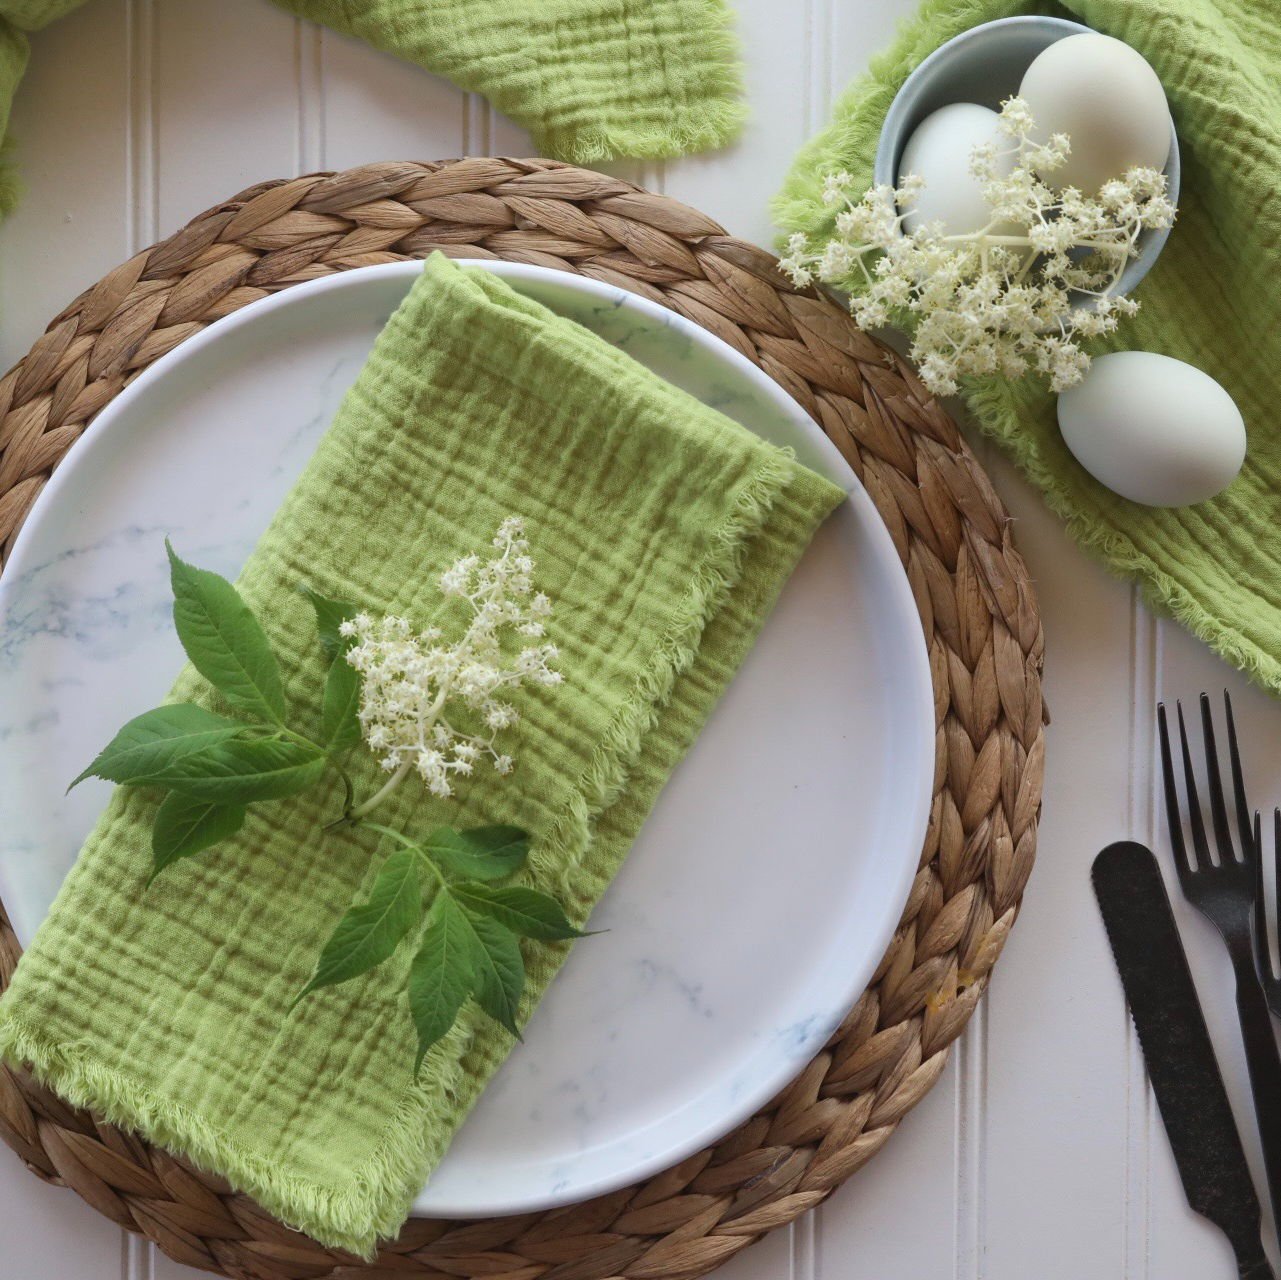 Hosting a dinner party? Impress your guests with the eco-chic touch of cotton napkins. Not only do they elevate the ambiance, but they also show your commitment to sustainability. Ripple cotton in Lime